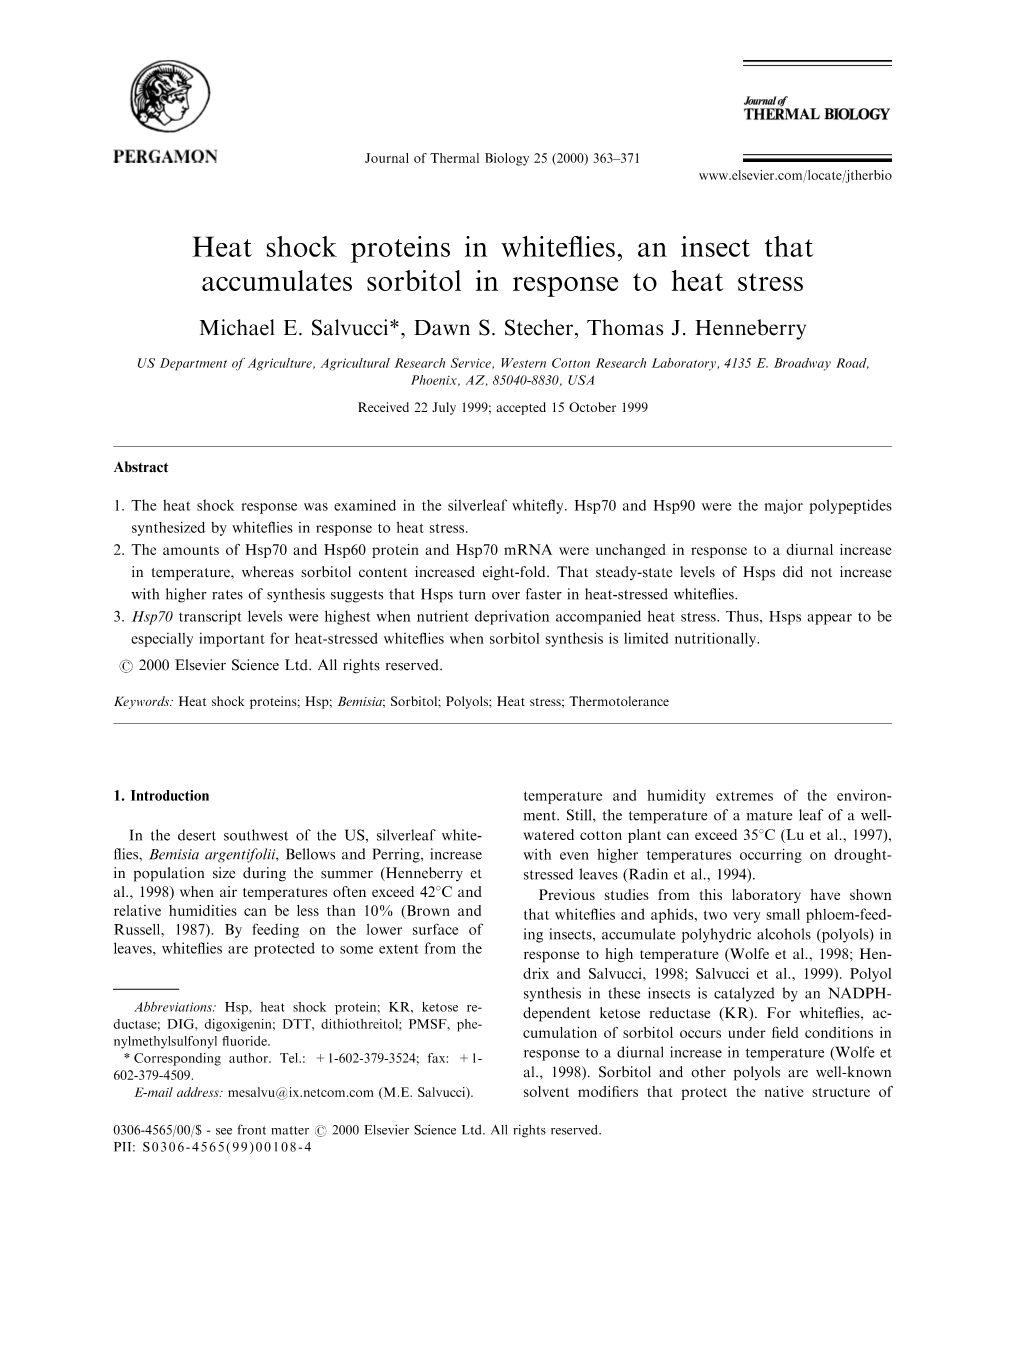 Heat Shock Proteins in Whiteflies, an Insect That Accumulates Sorbitol In